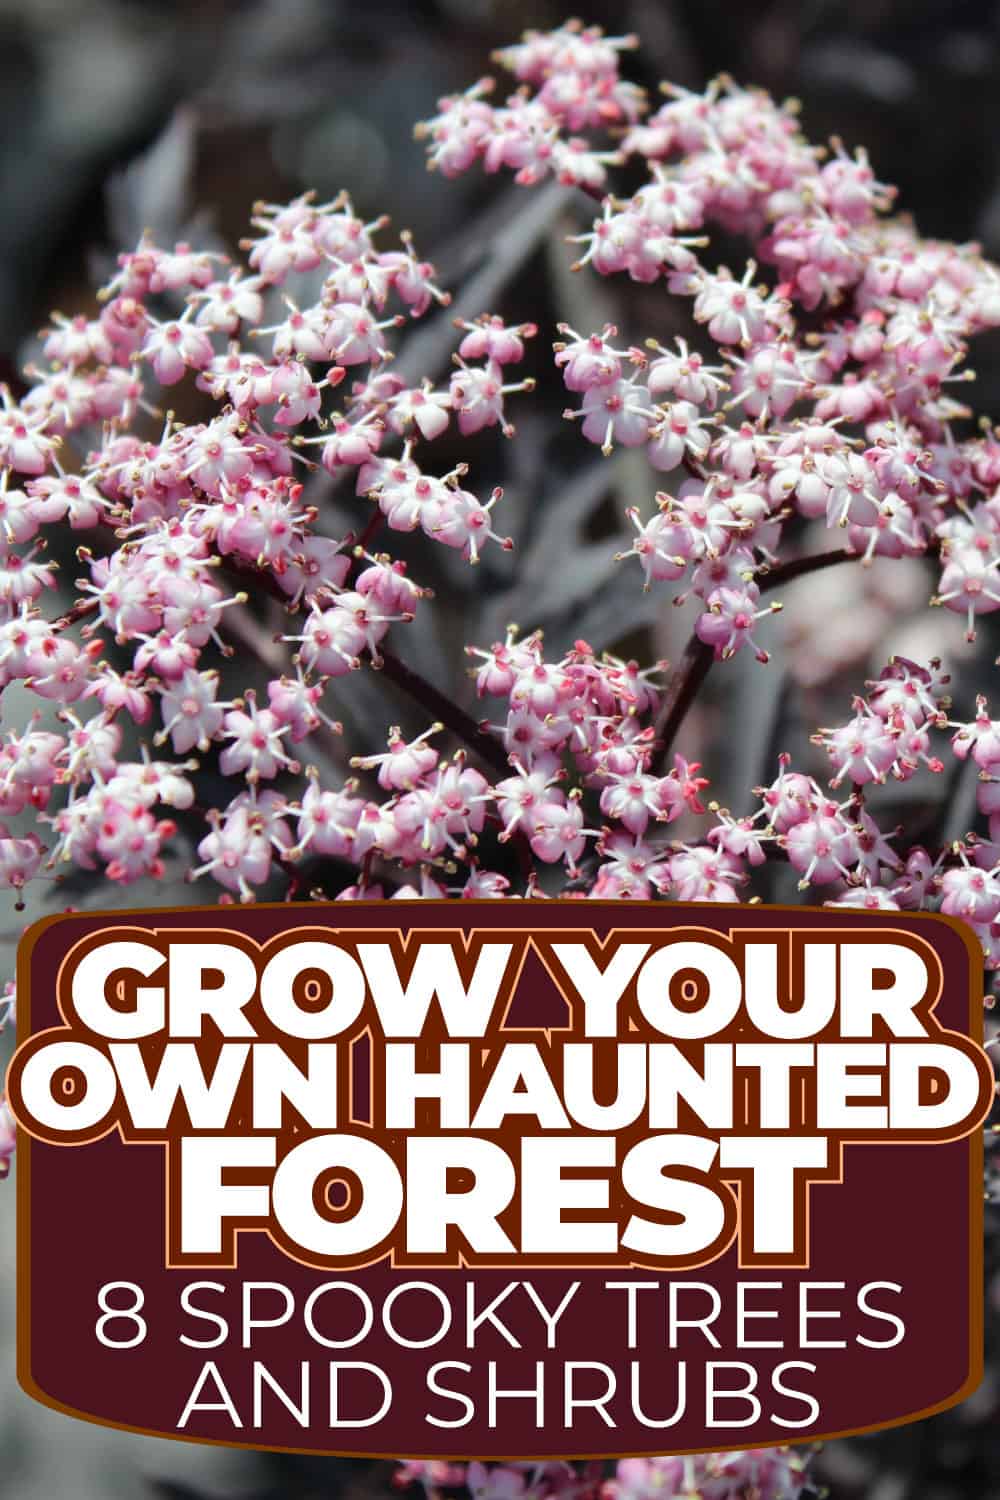 Grow Your Own Haunted Forest: 8 Spooky Trees and Shrubs